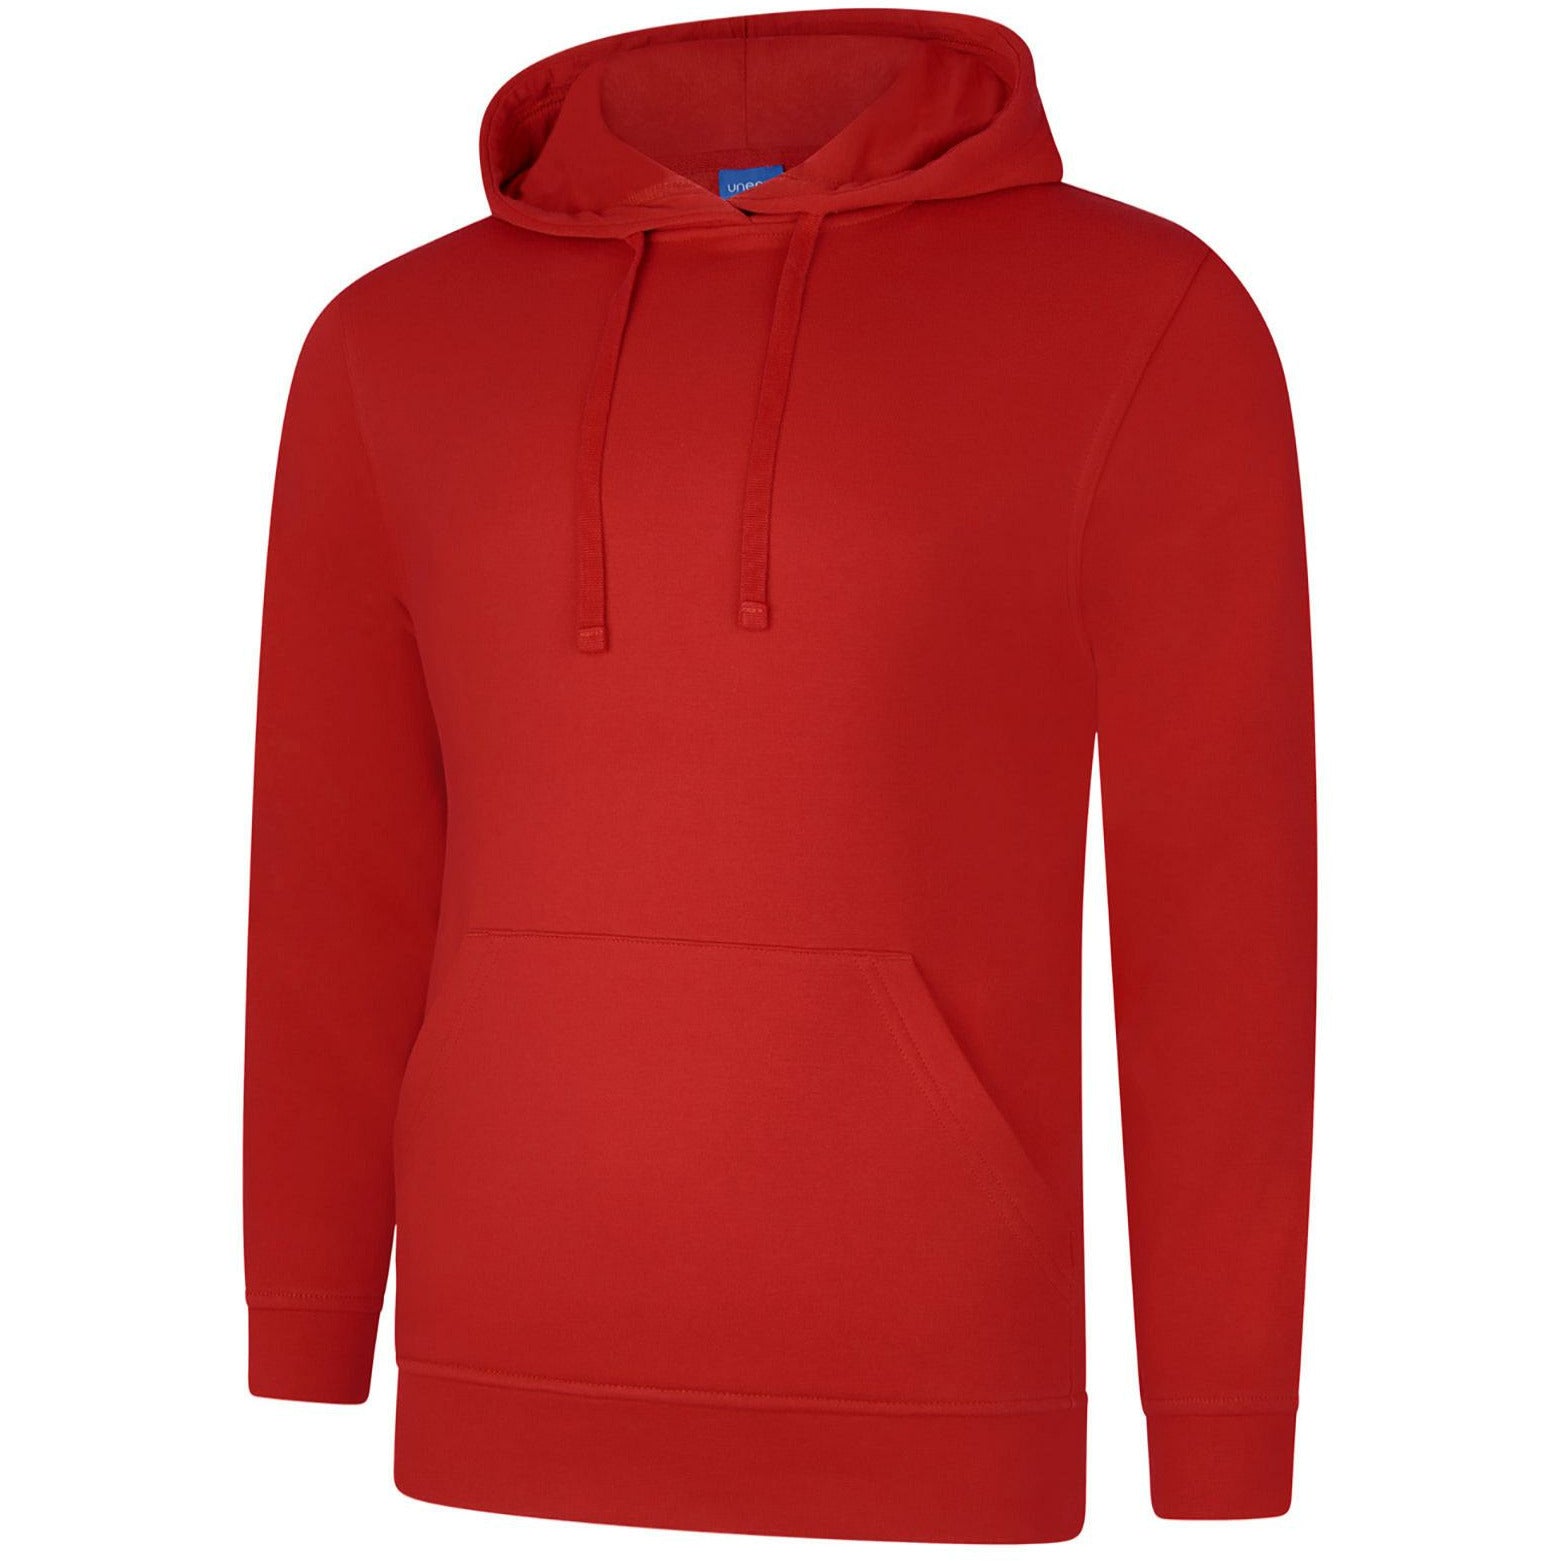 Deluxe Hooded Sweatshirt (L - 2XL) Sizzling Red